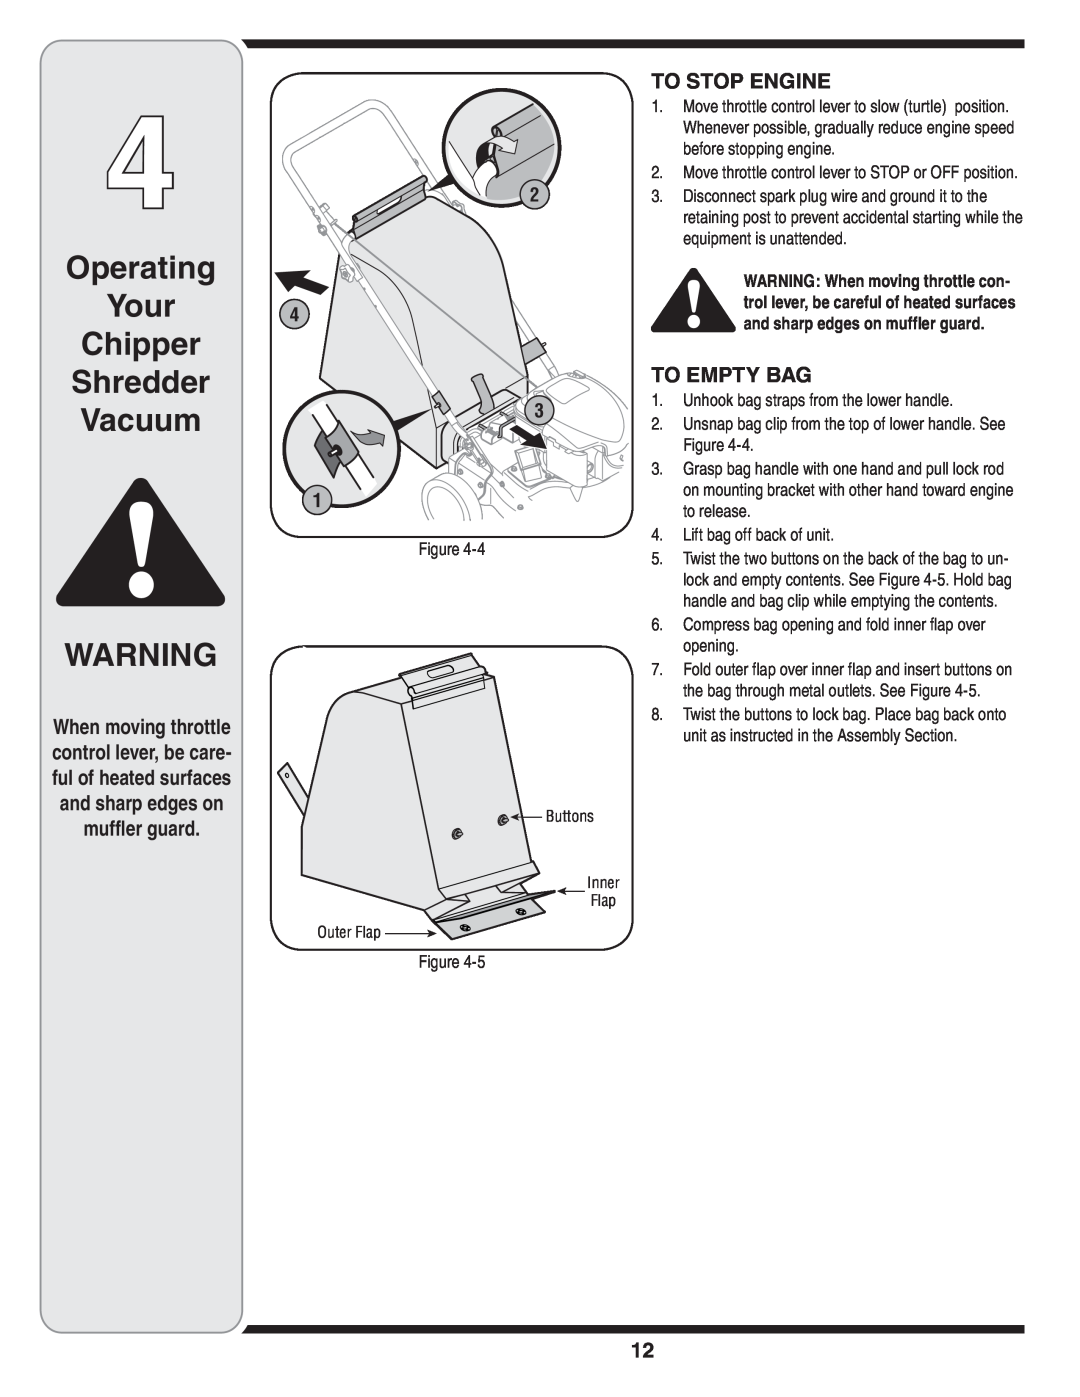 MTD Series 020 warranty Operating Your Chipper Shredder Vacuum, To Stop Engine, To Empty Bag 